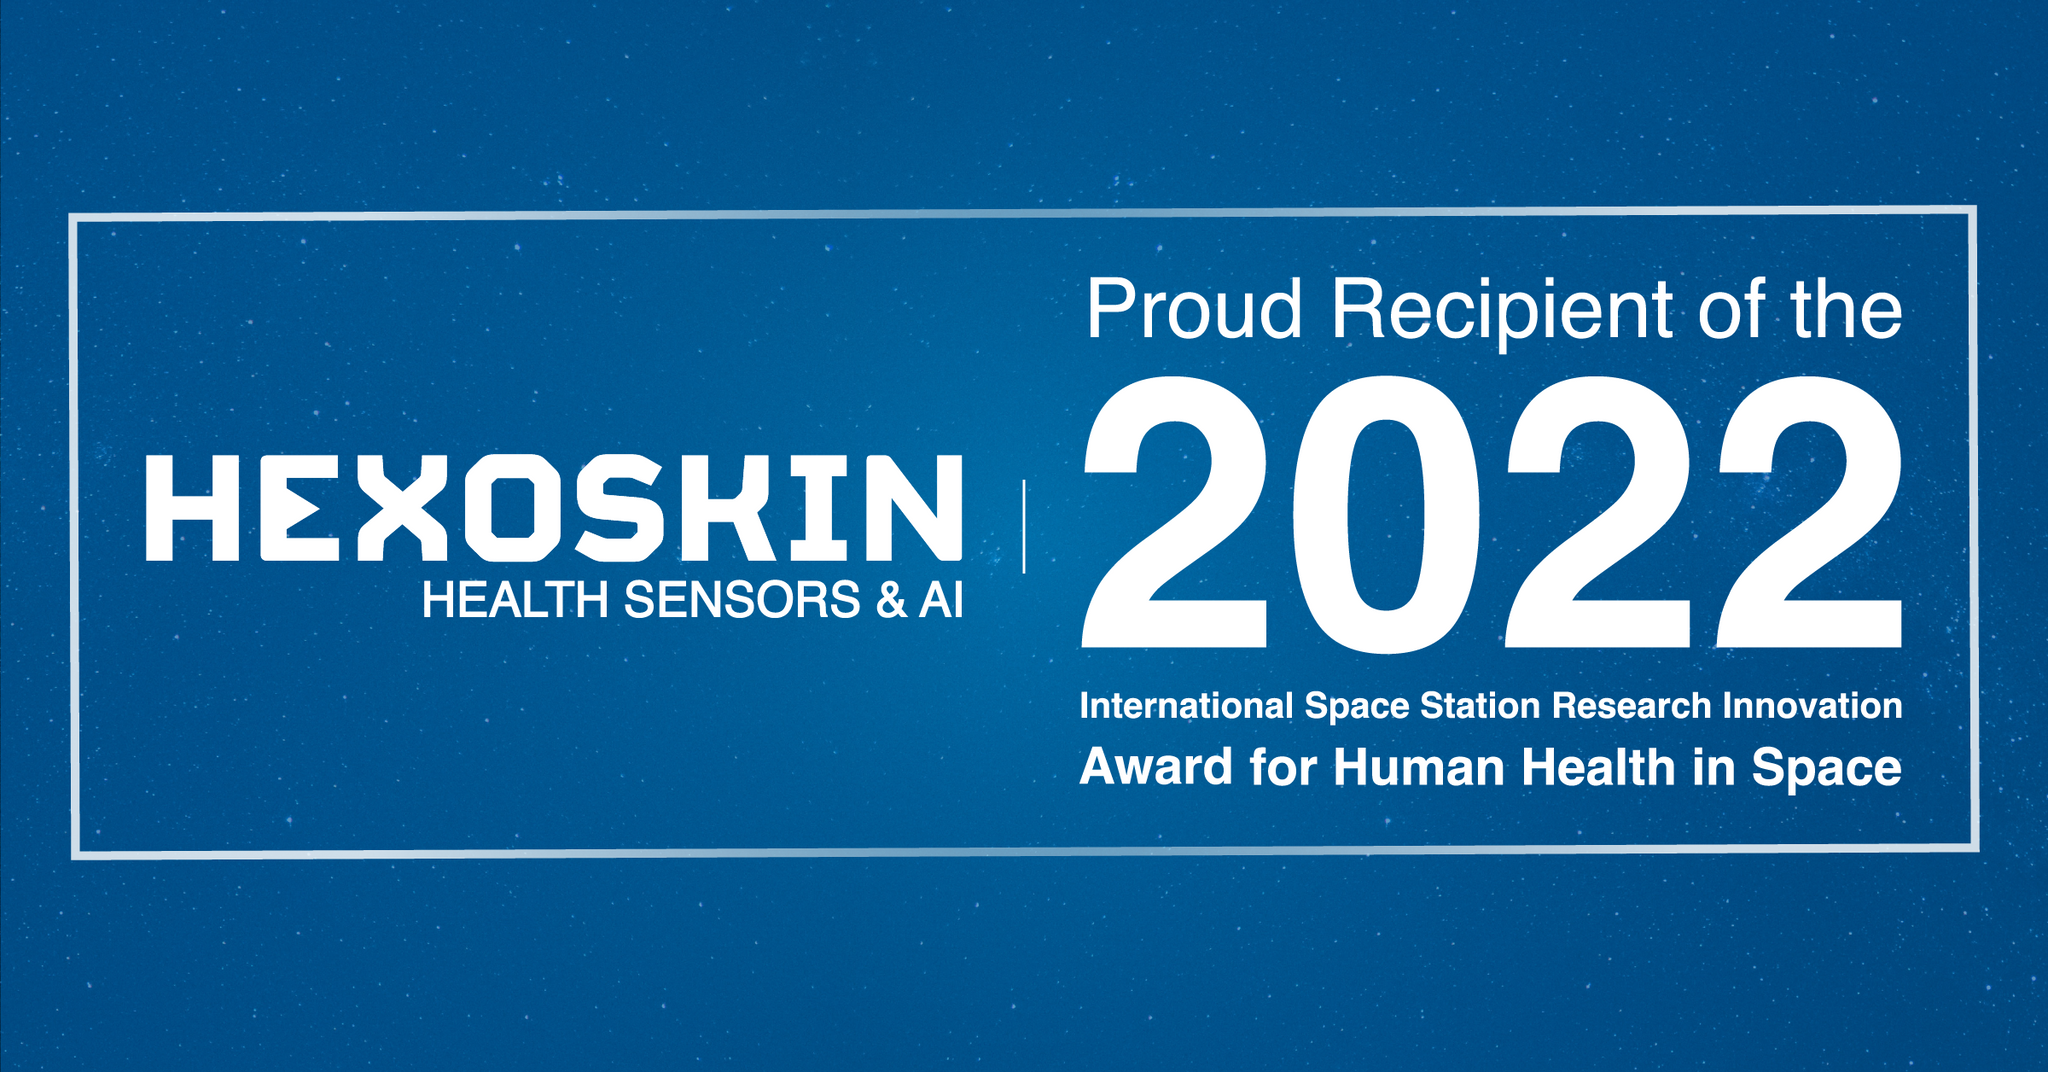 Hexoskin - International Space Station Research Innovation Award for Human Health in Space 2022